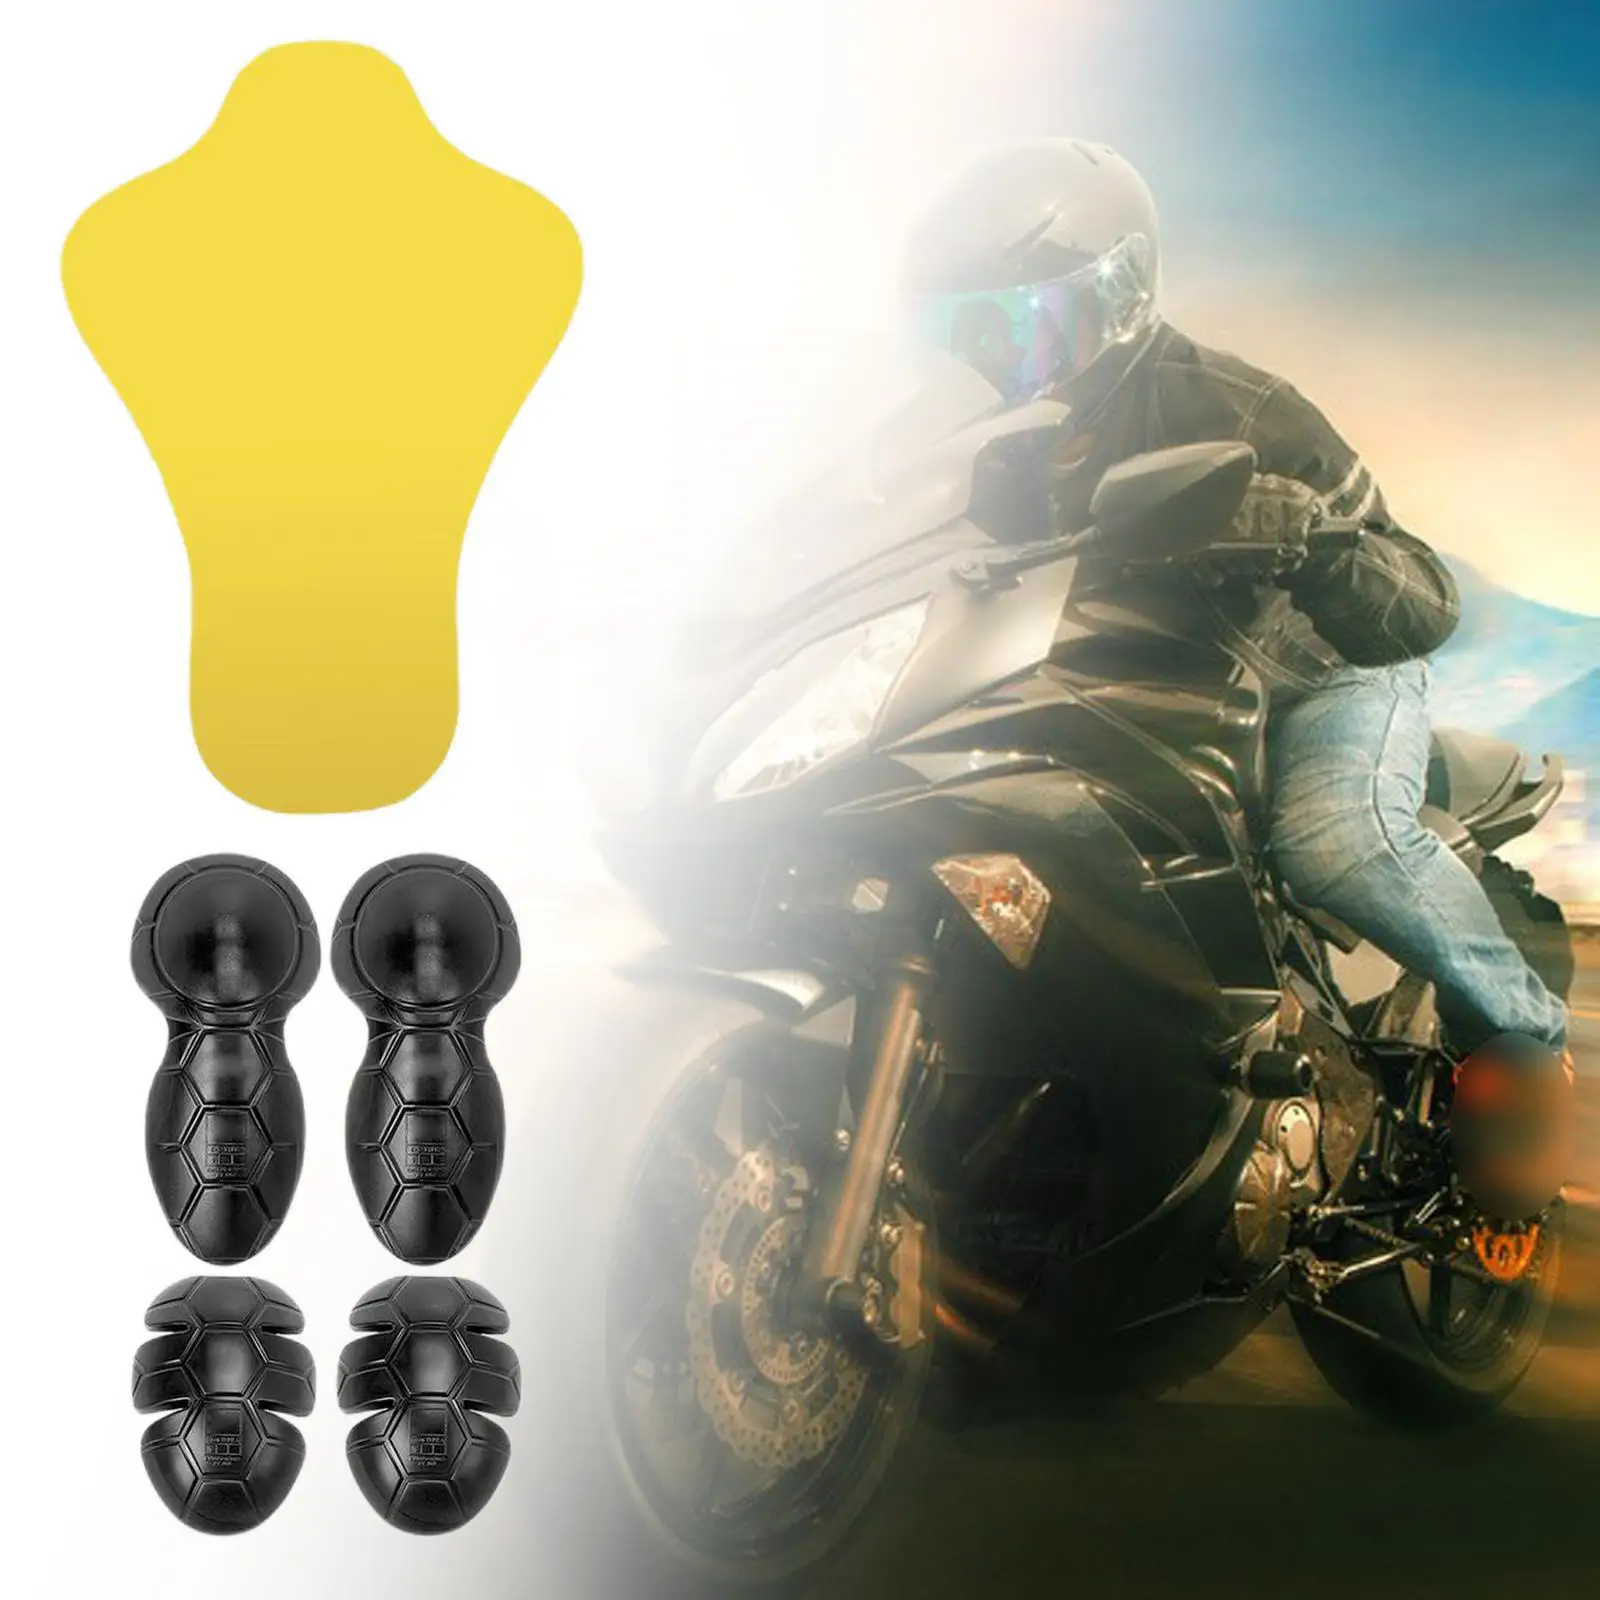 5 Pieces Motorcycle Jacket Insert Armor Protectors Set Protective Gear Back Chest Guard